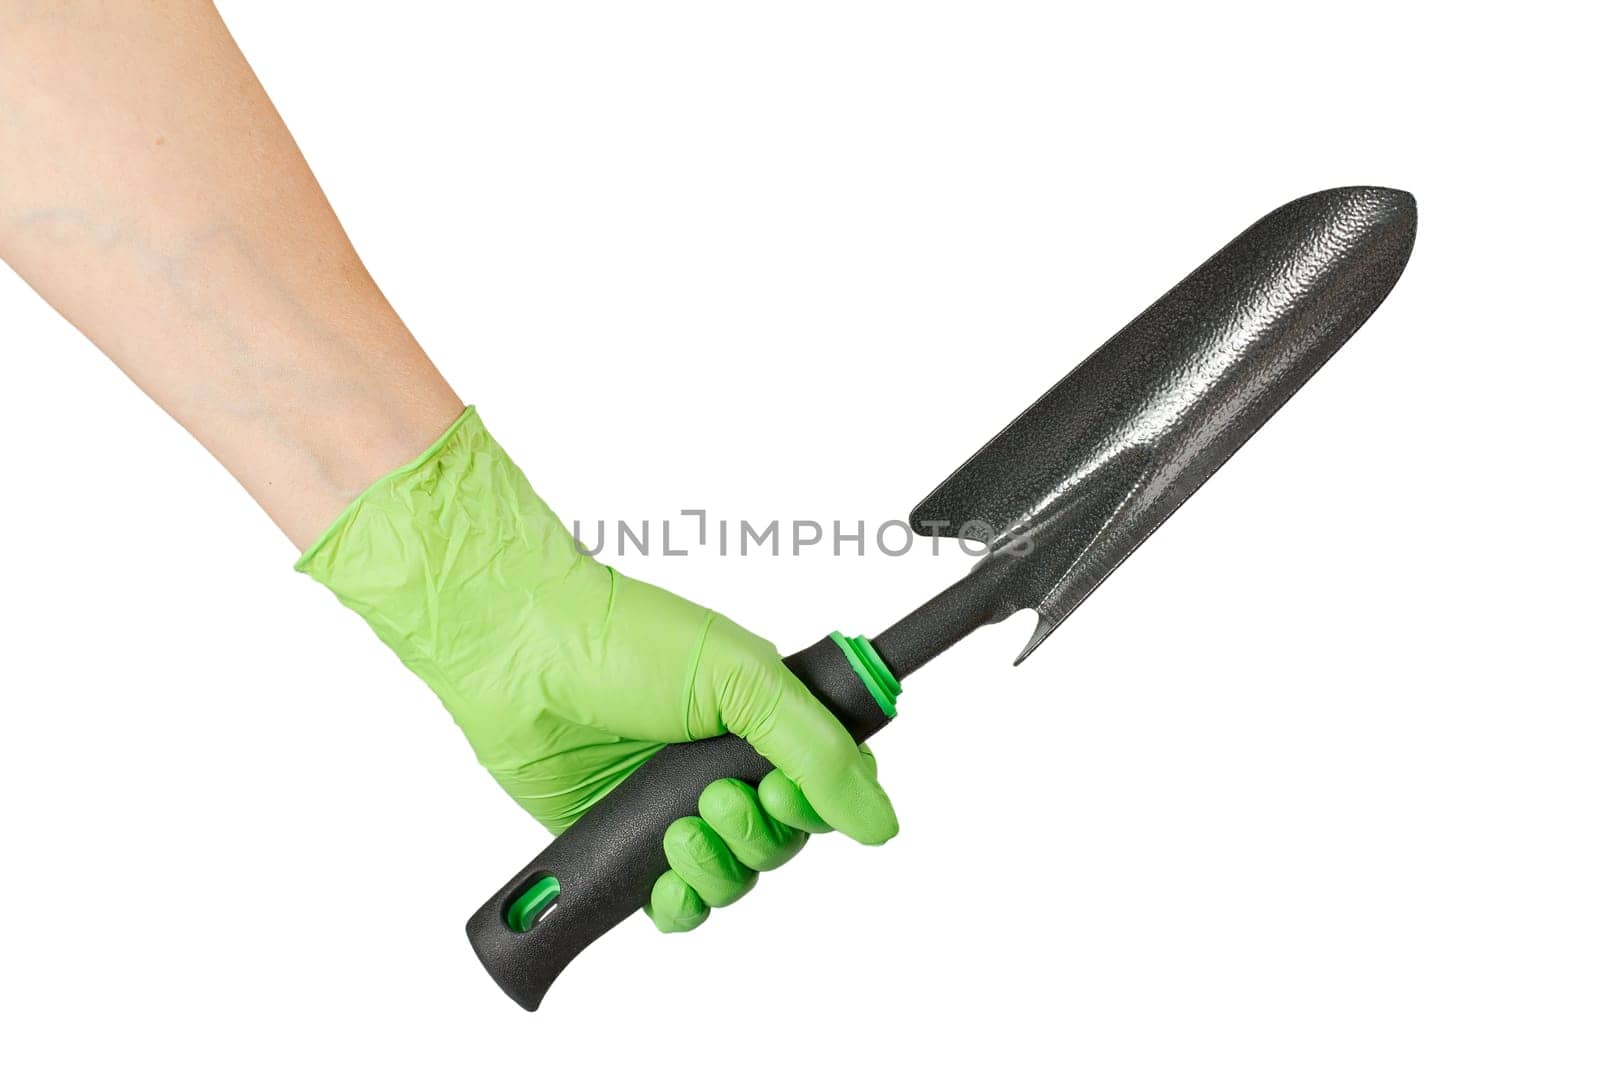 Small garden trowel in woman's hand dressed in a green rubber glove on the gray background.